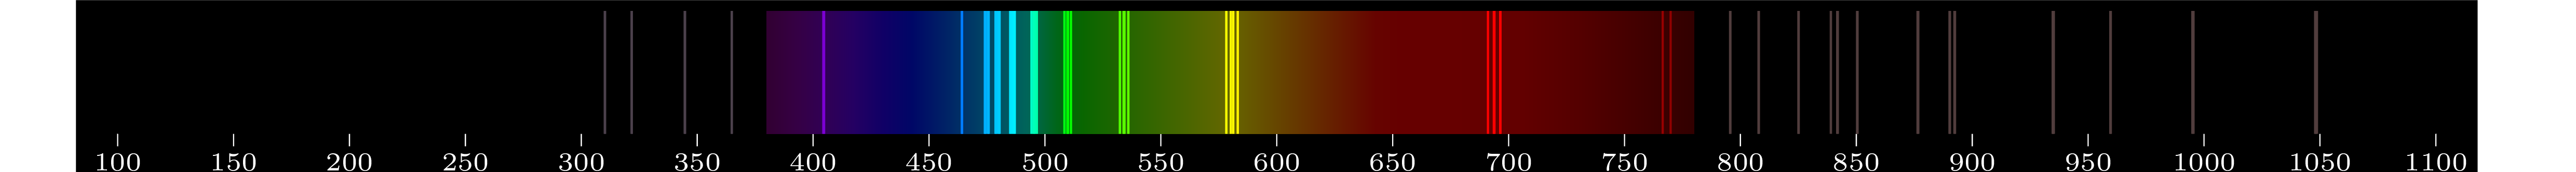 emmision spectra of element K